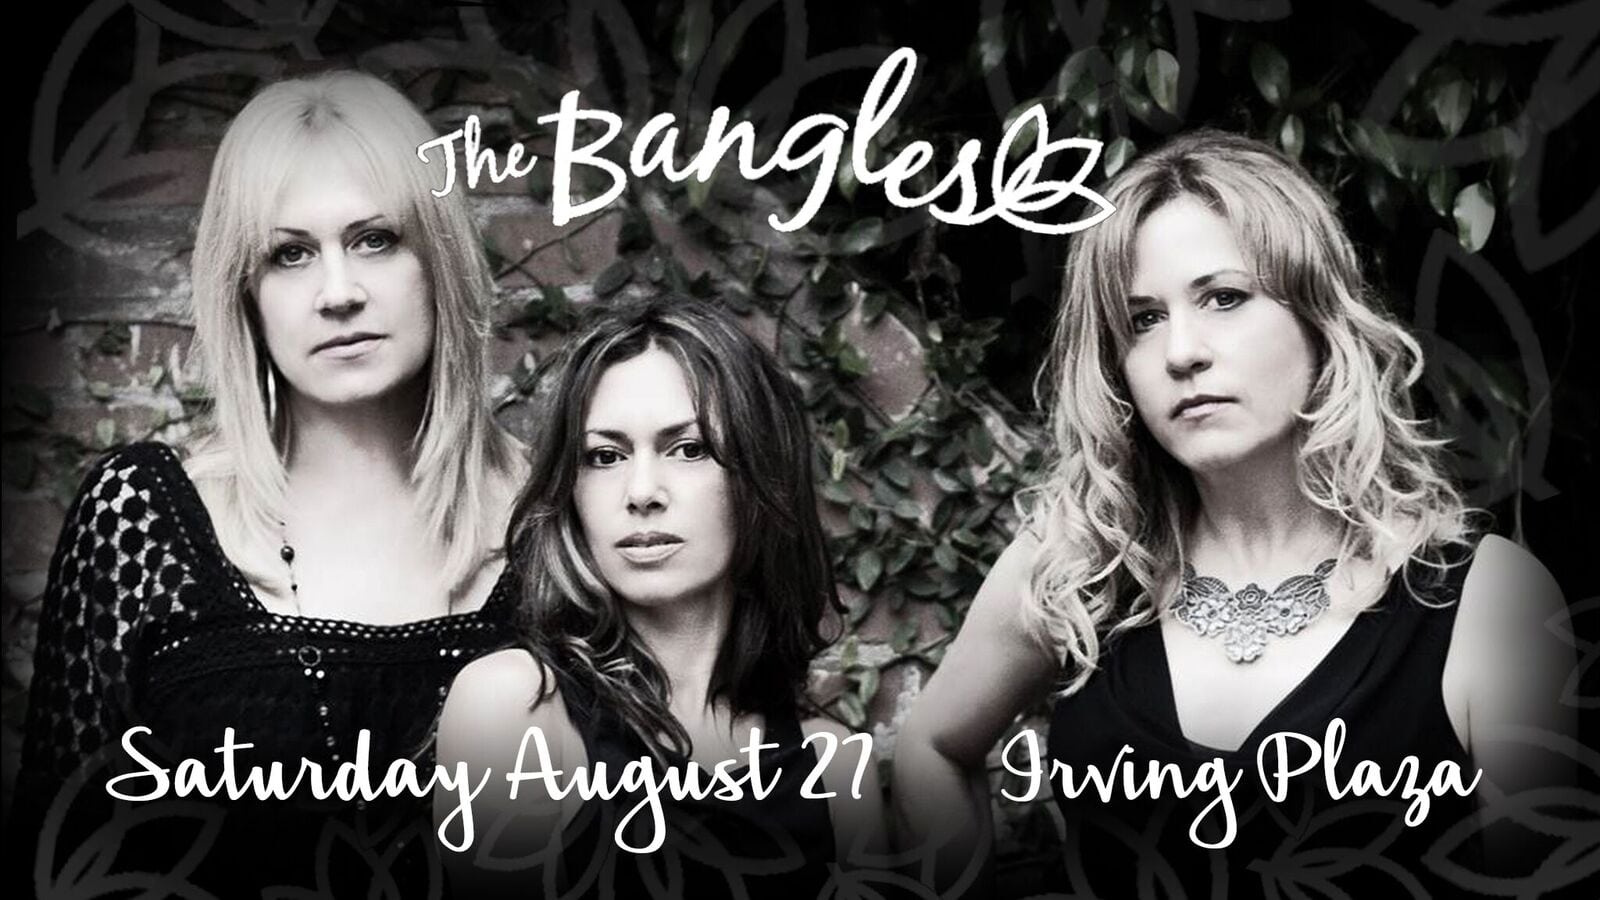 The Bangles at Irving Plaza on 08-27-16